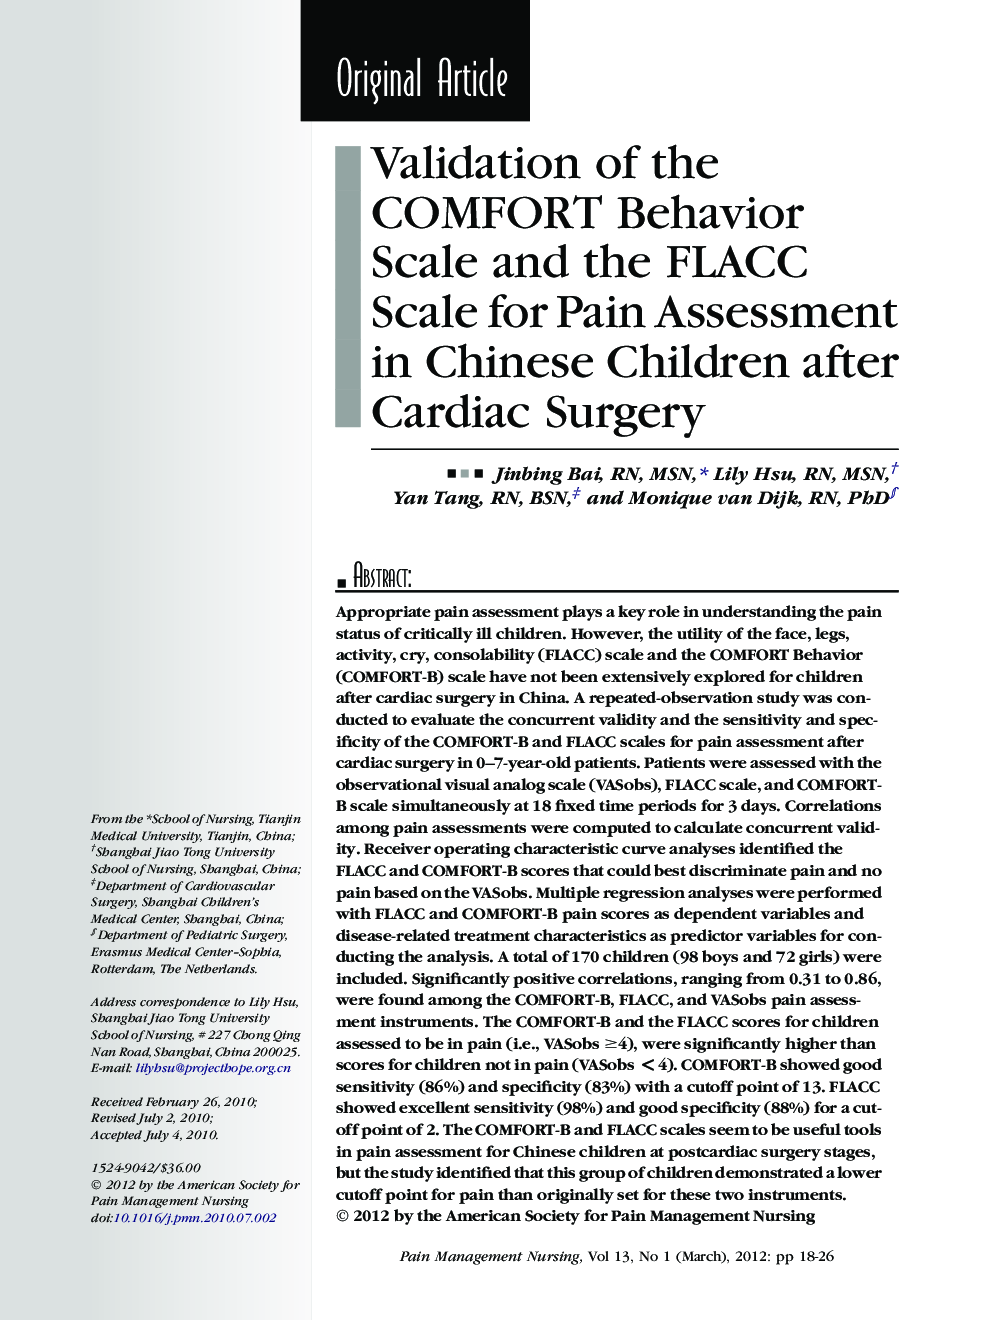 Validation of the COMFORT Behavior Scale and the FLACC Scale for Pain Assessment in Chinese Children after Cardiac Surgery